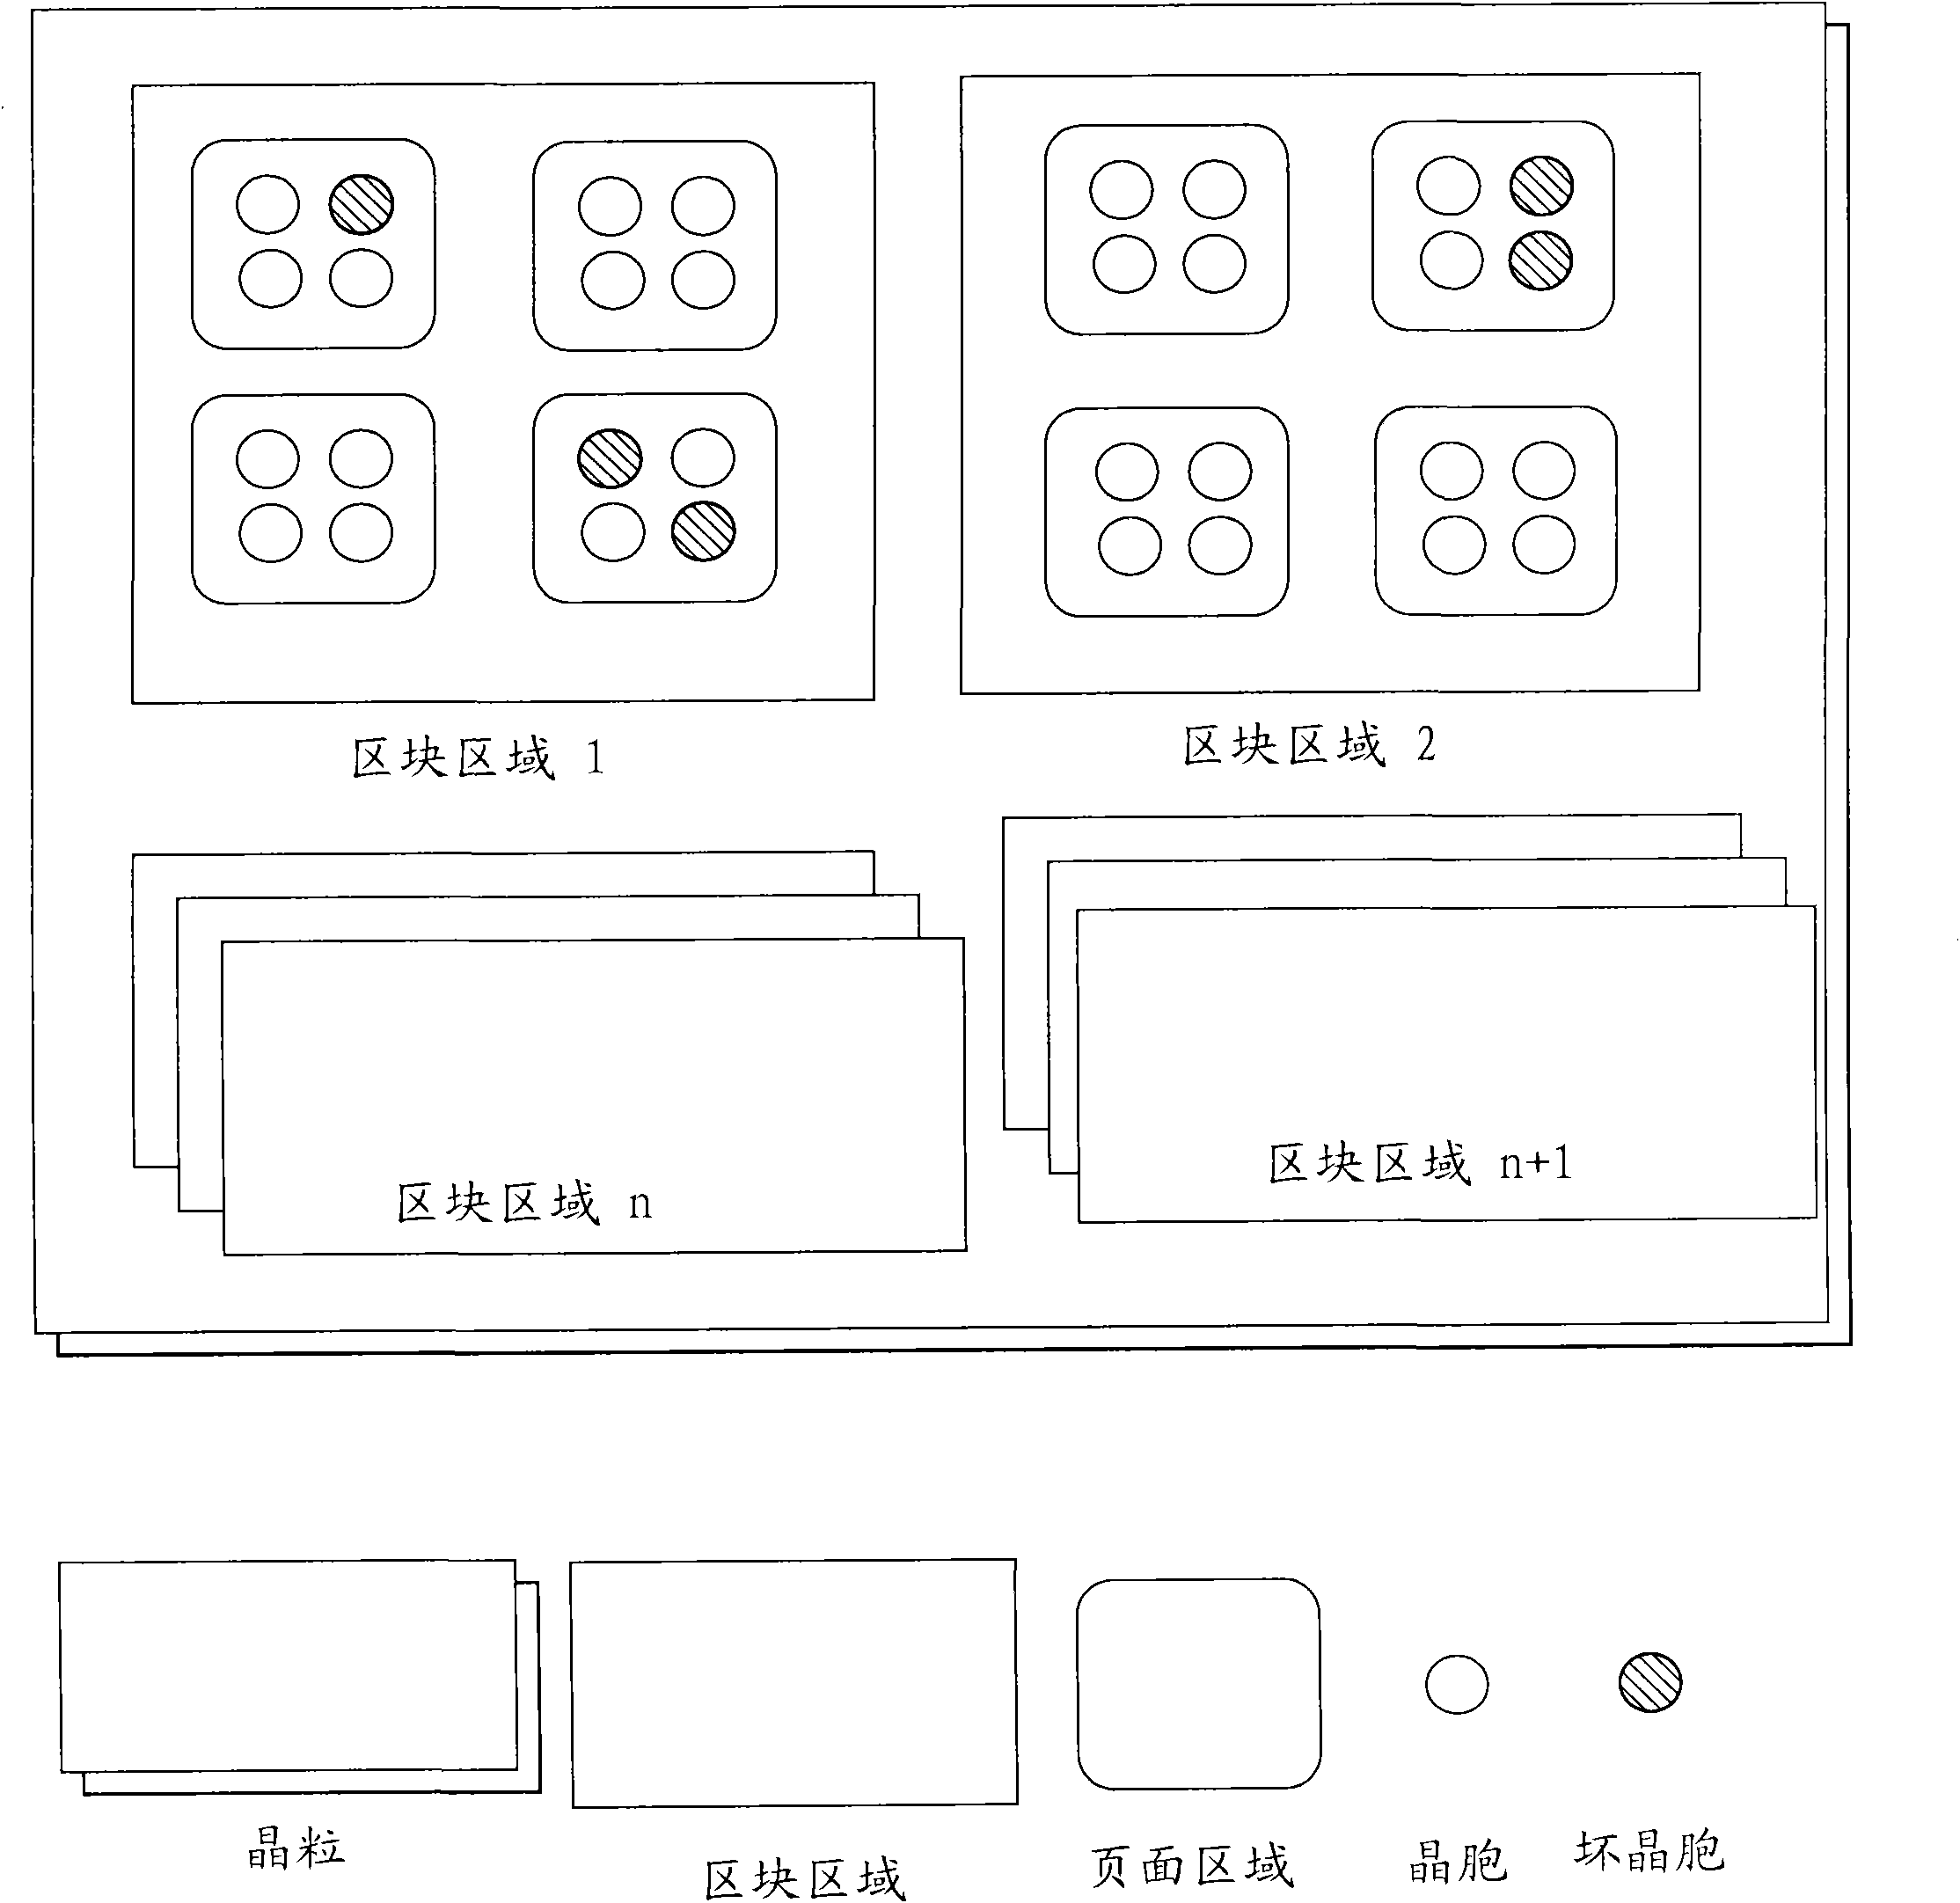 Method for reclaiming and rebuilding memory space